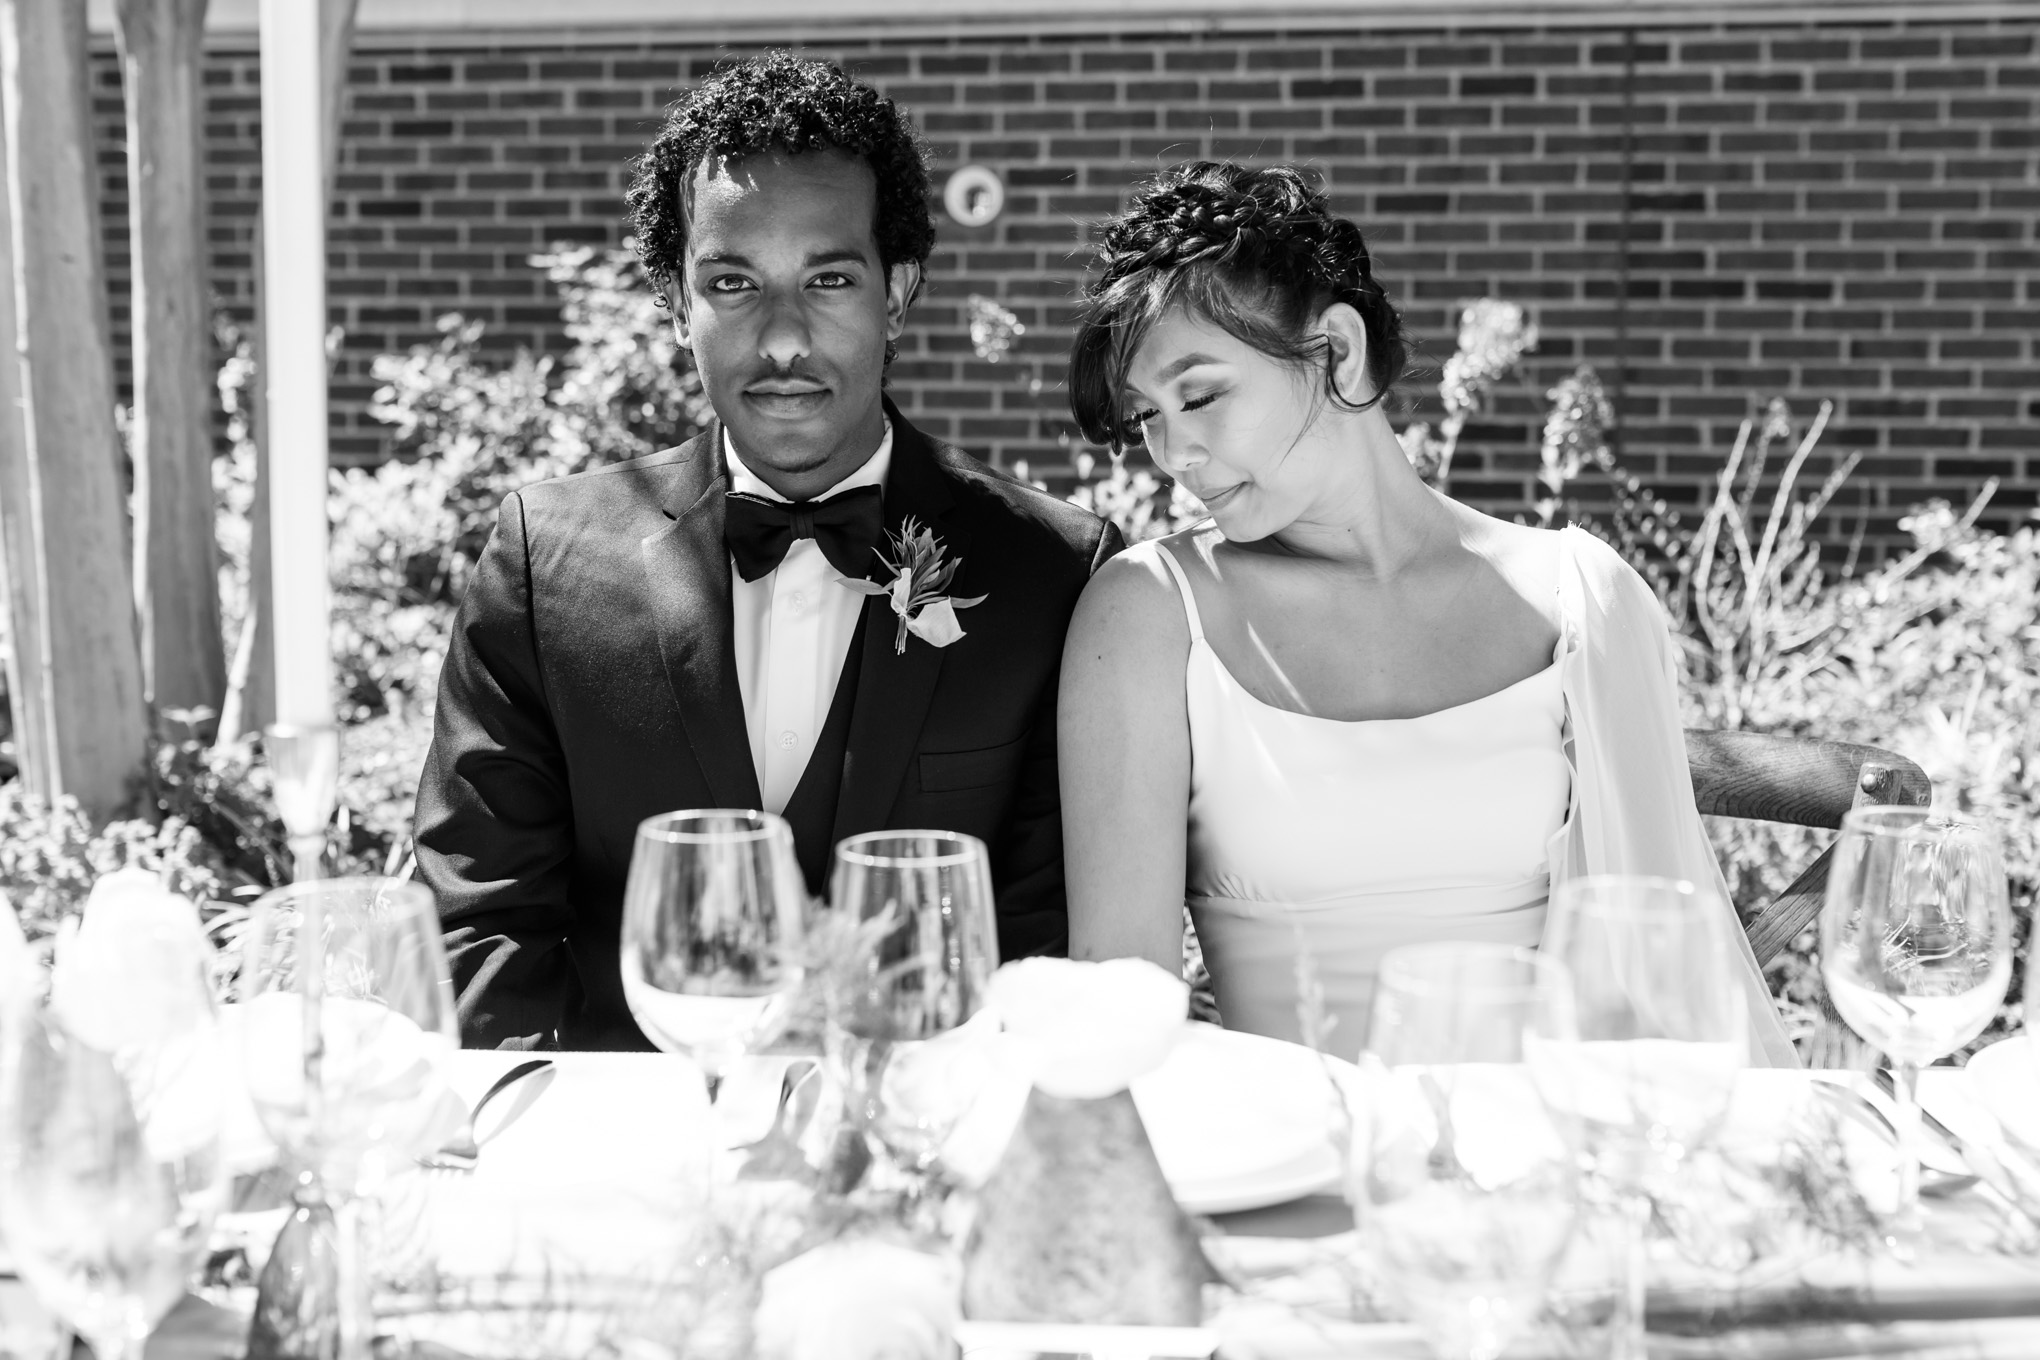 modern minimalist wedding inspiration, black and white photography, bride and groom, tuxedo, up do, Old Town Alexandria, hotel wedding, styled shoot, modern wedding, minimalist wedding, tablescape